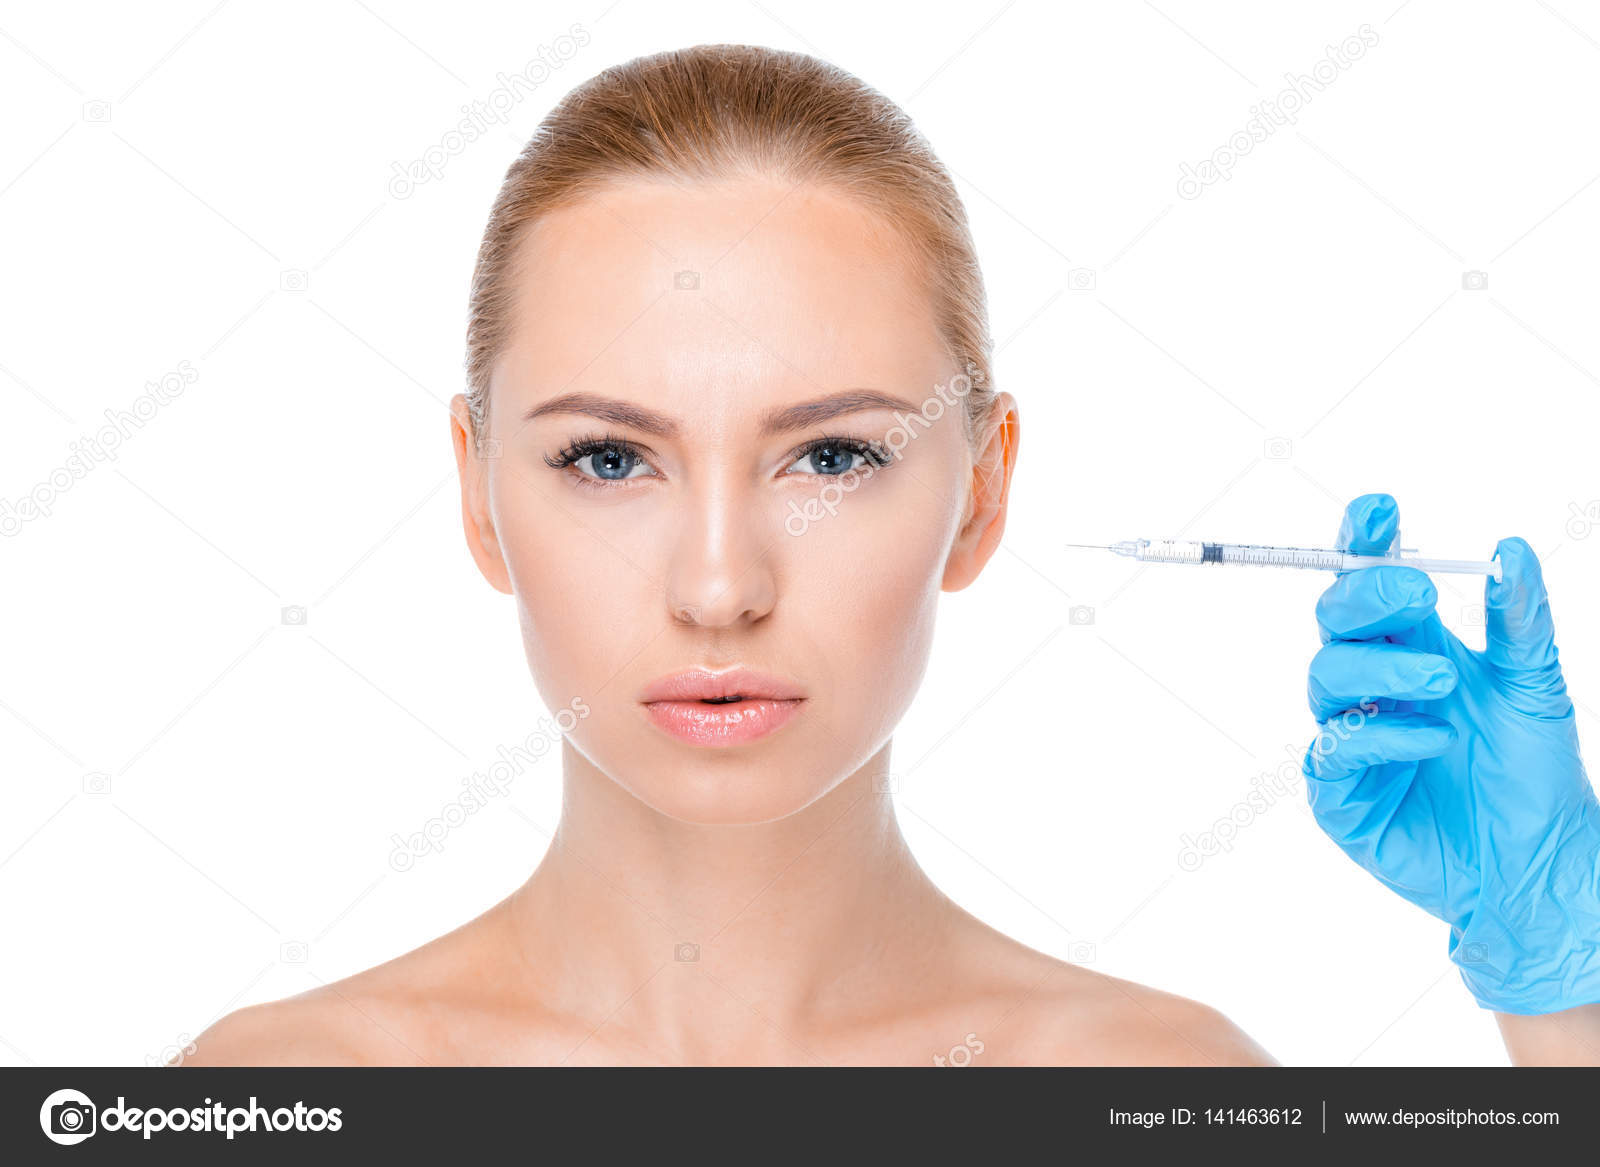 Botox Treatment in Milford, CT. Cosmetic Frown Lines & Crow's Feet Treatment